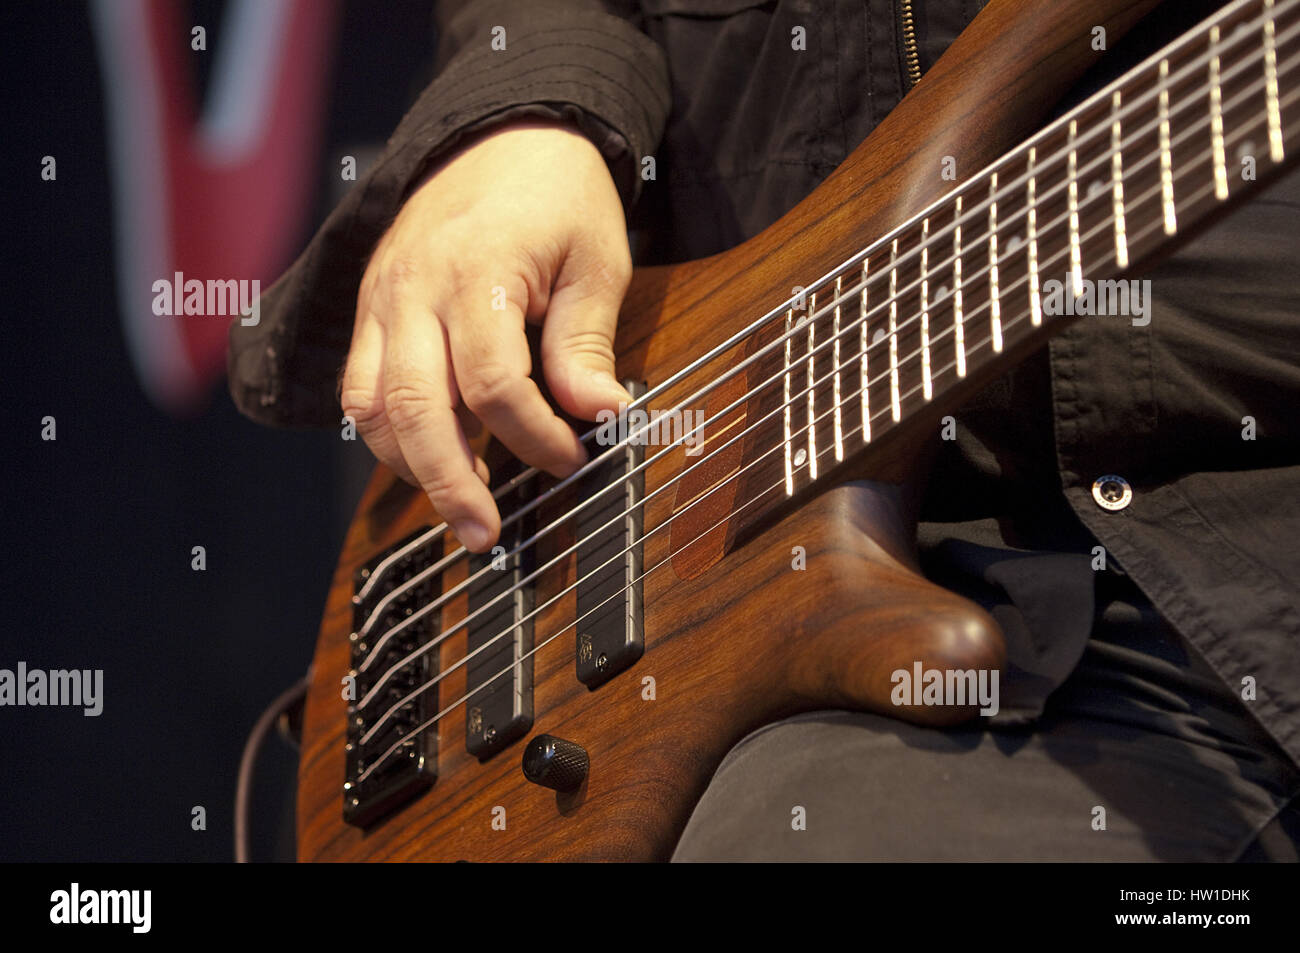 Bassist *** Local Caption *** guitar play, guitarist, stringed instrument, music instrument, instrument, strings, fingers, hand, pull, reach, practice Stock Photo